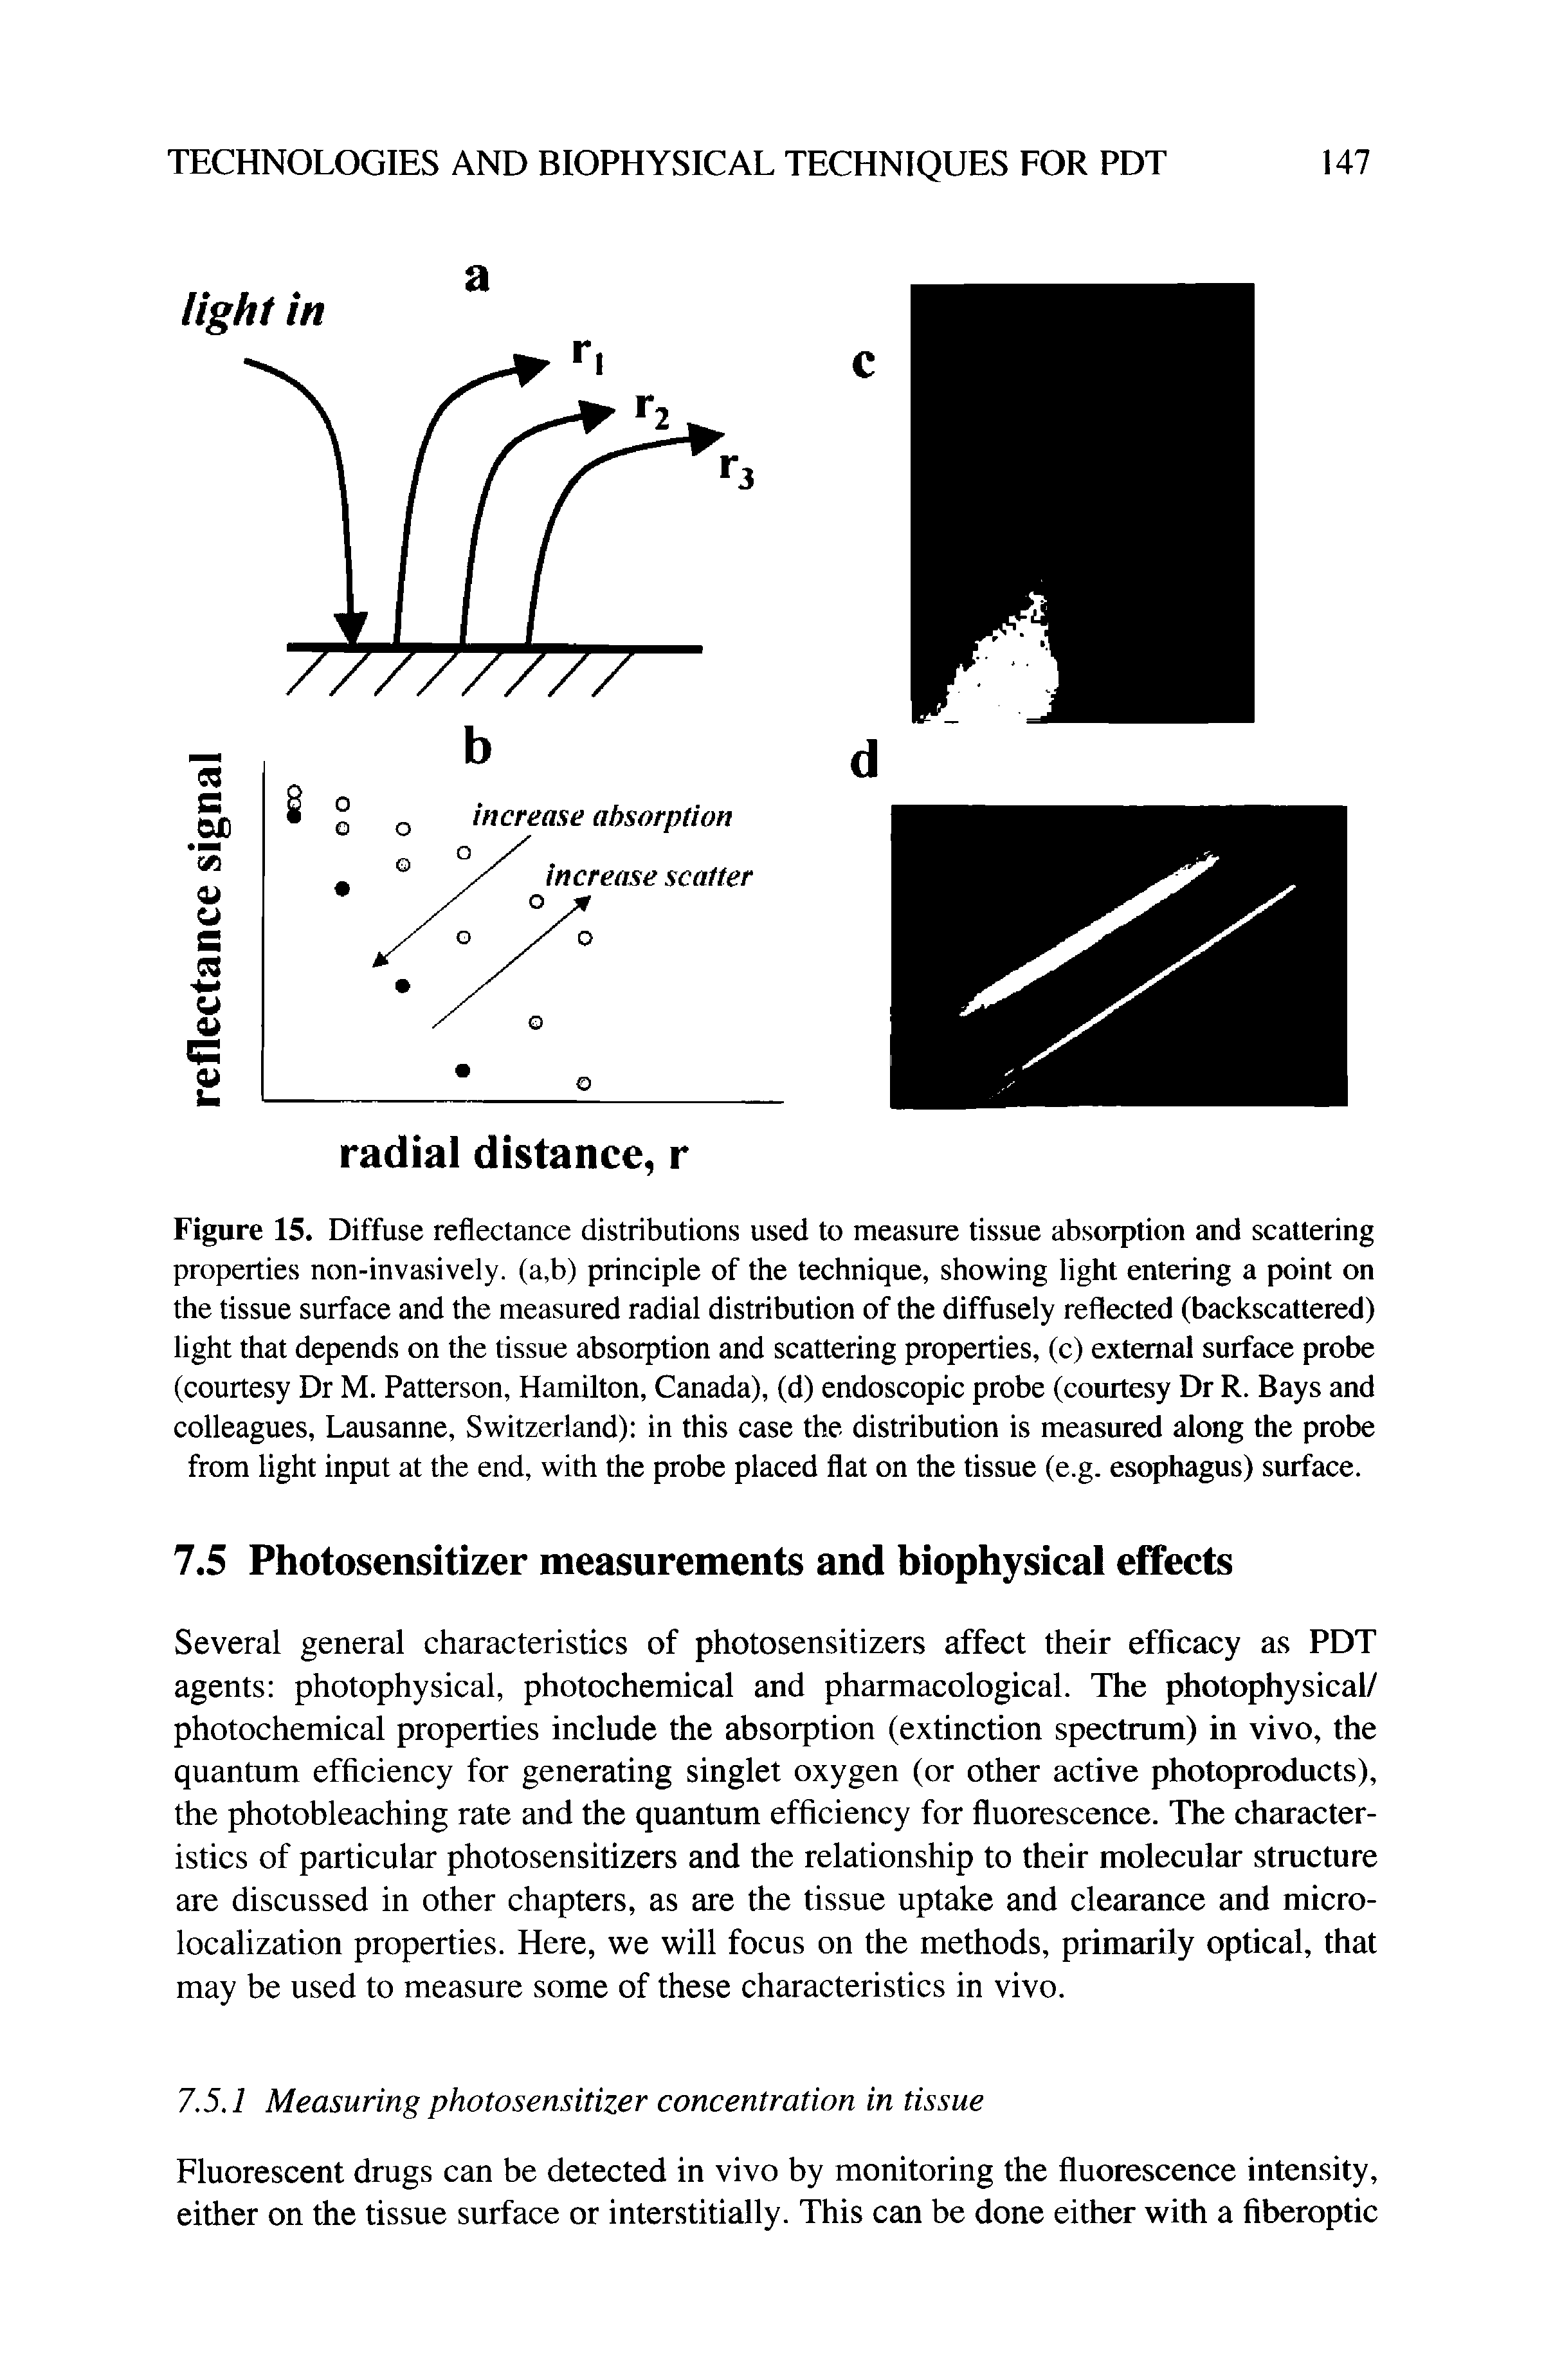 Figure 15. Diffuse reflectance distributions used to measure tissue absorption and scattering properties non-invasively. (a,b) principle of the technique, showing light entering a point on the tissue surface and the measured radial distribution of the diffusely reflected (backscattered) light that depends on the tissue absorption and scattering properties, (c) external surface probe (courtesy Dr M. Patterson, Hamilton, Canada), (d) endoscopic probe (courtesy Dr R. Bays and colleagues, Lausanne, Switzerland) in this case the distribution is measured along the probe from light input at the end, with the probe placed flat on the tissue (e.g. esophagus) surface.